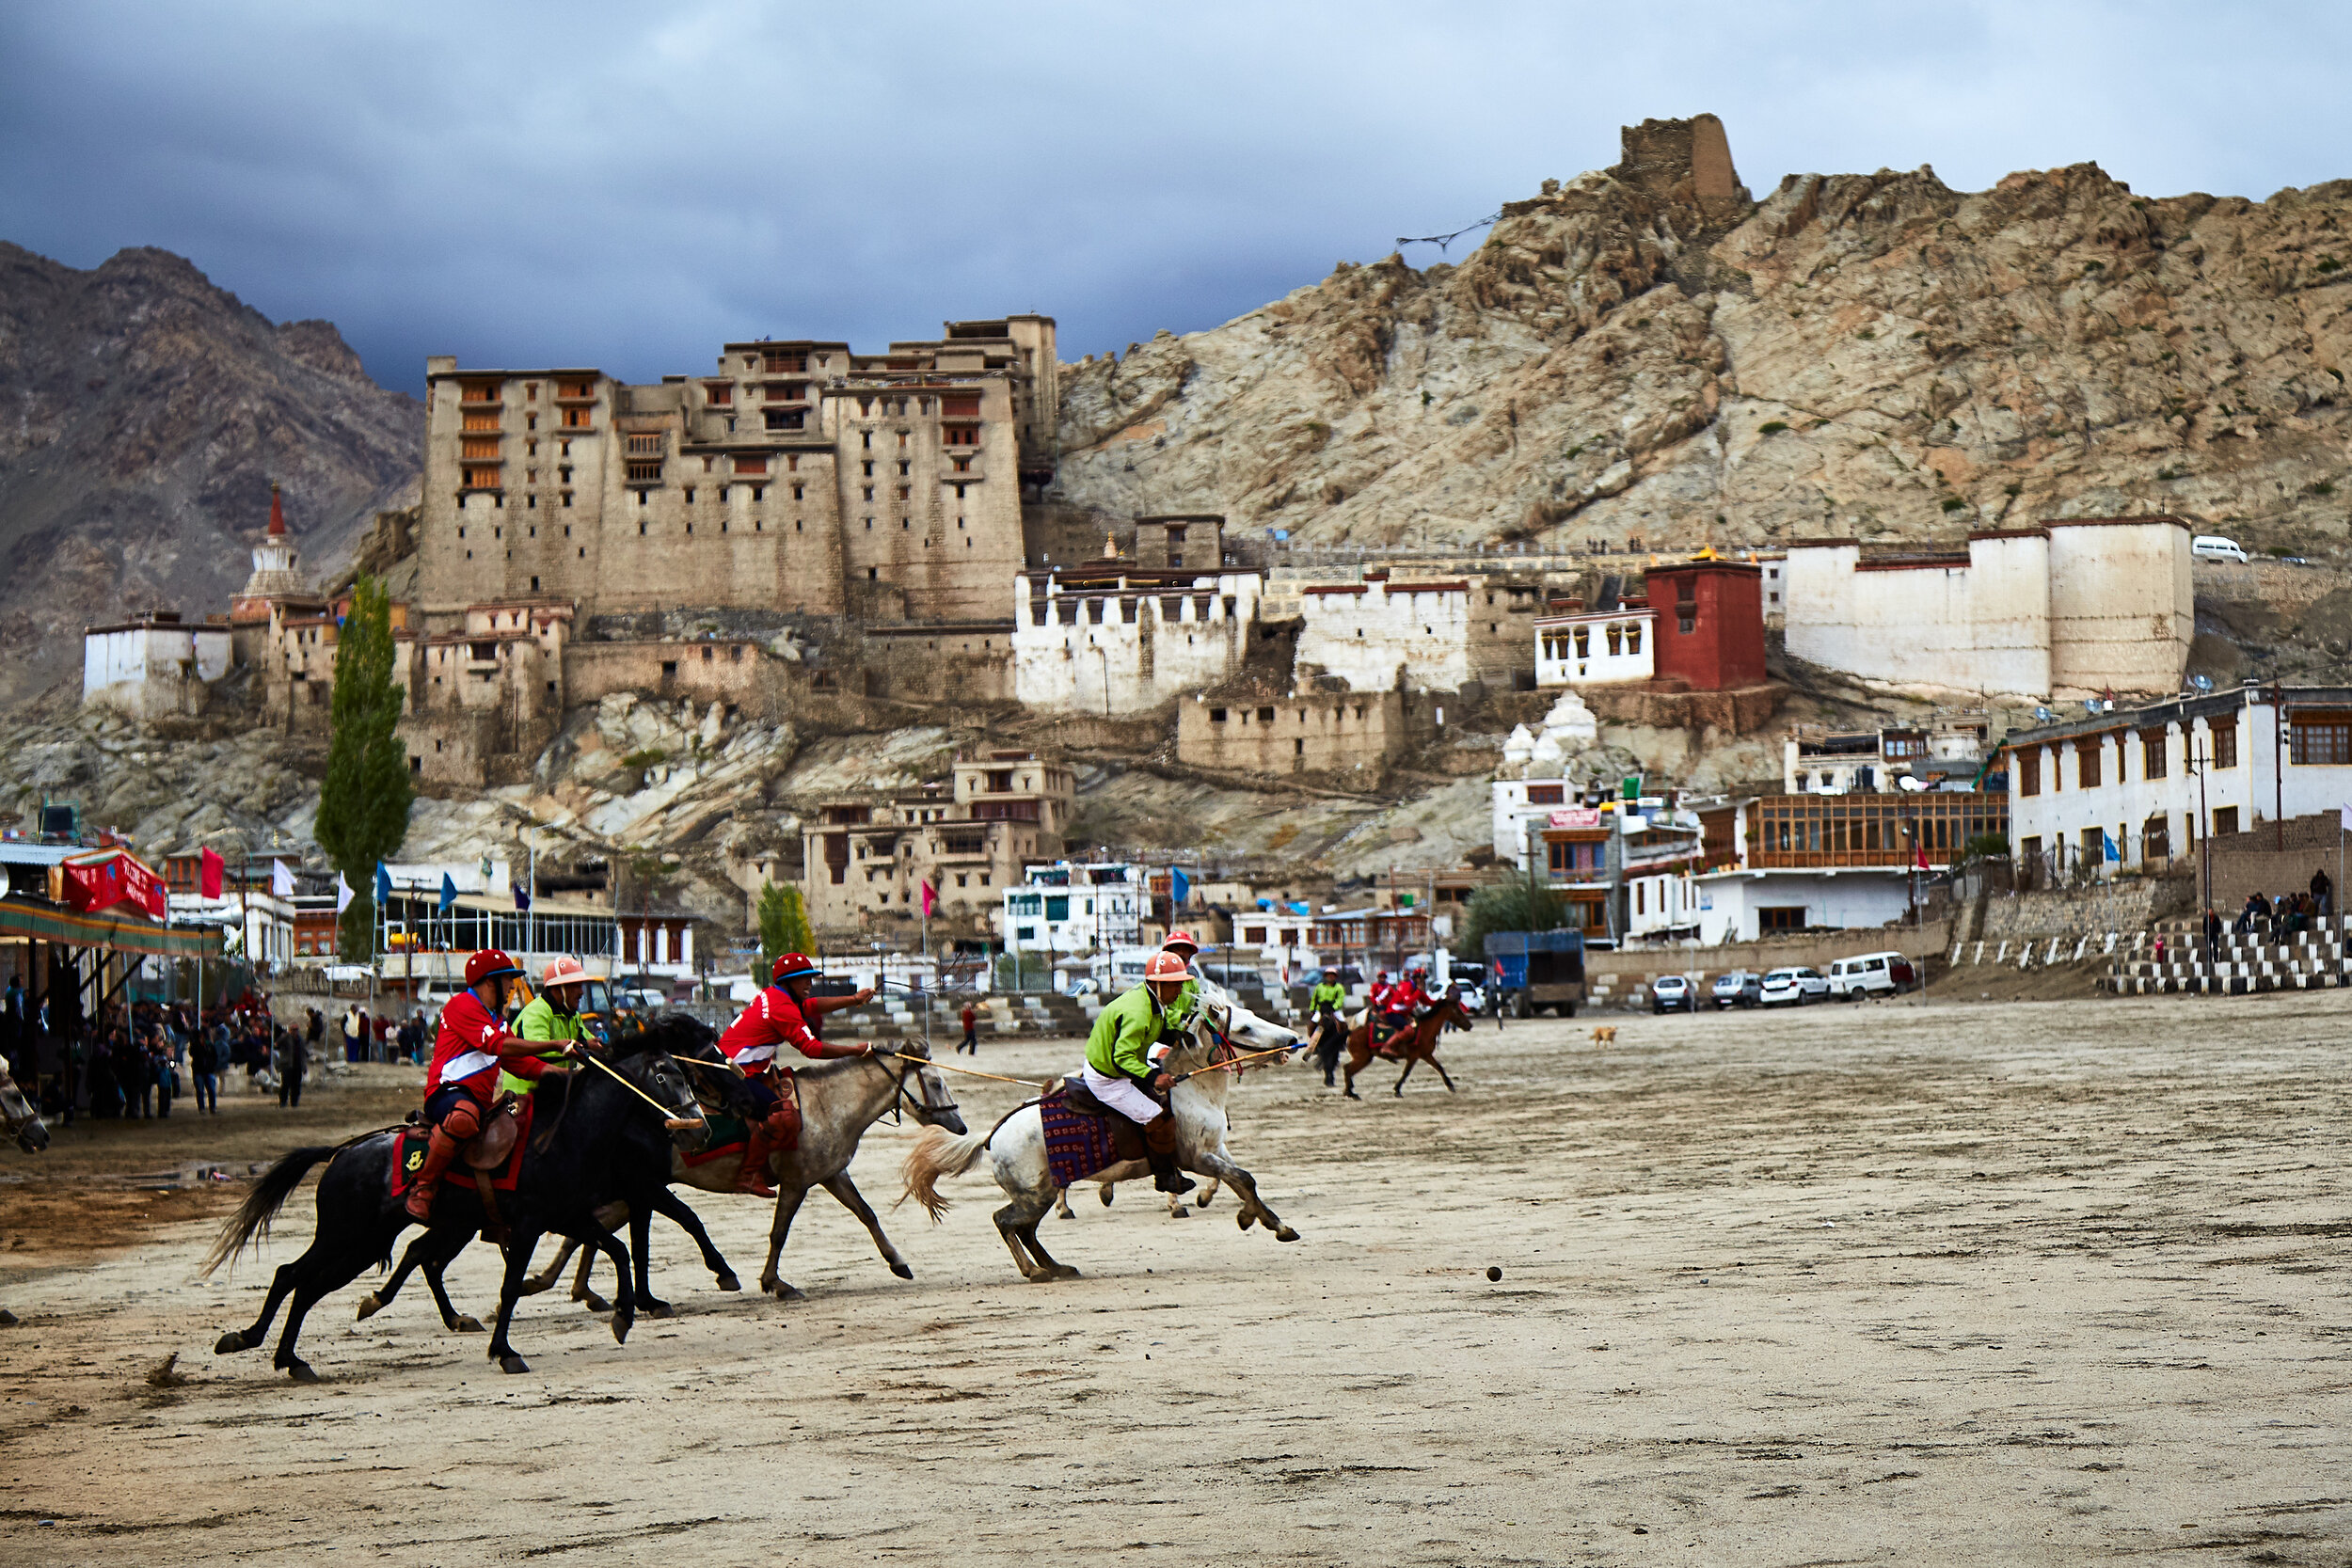  An annual polo game being played at the capital city of Leh.  